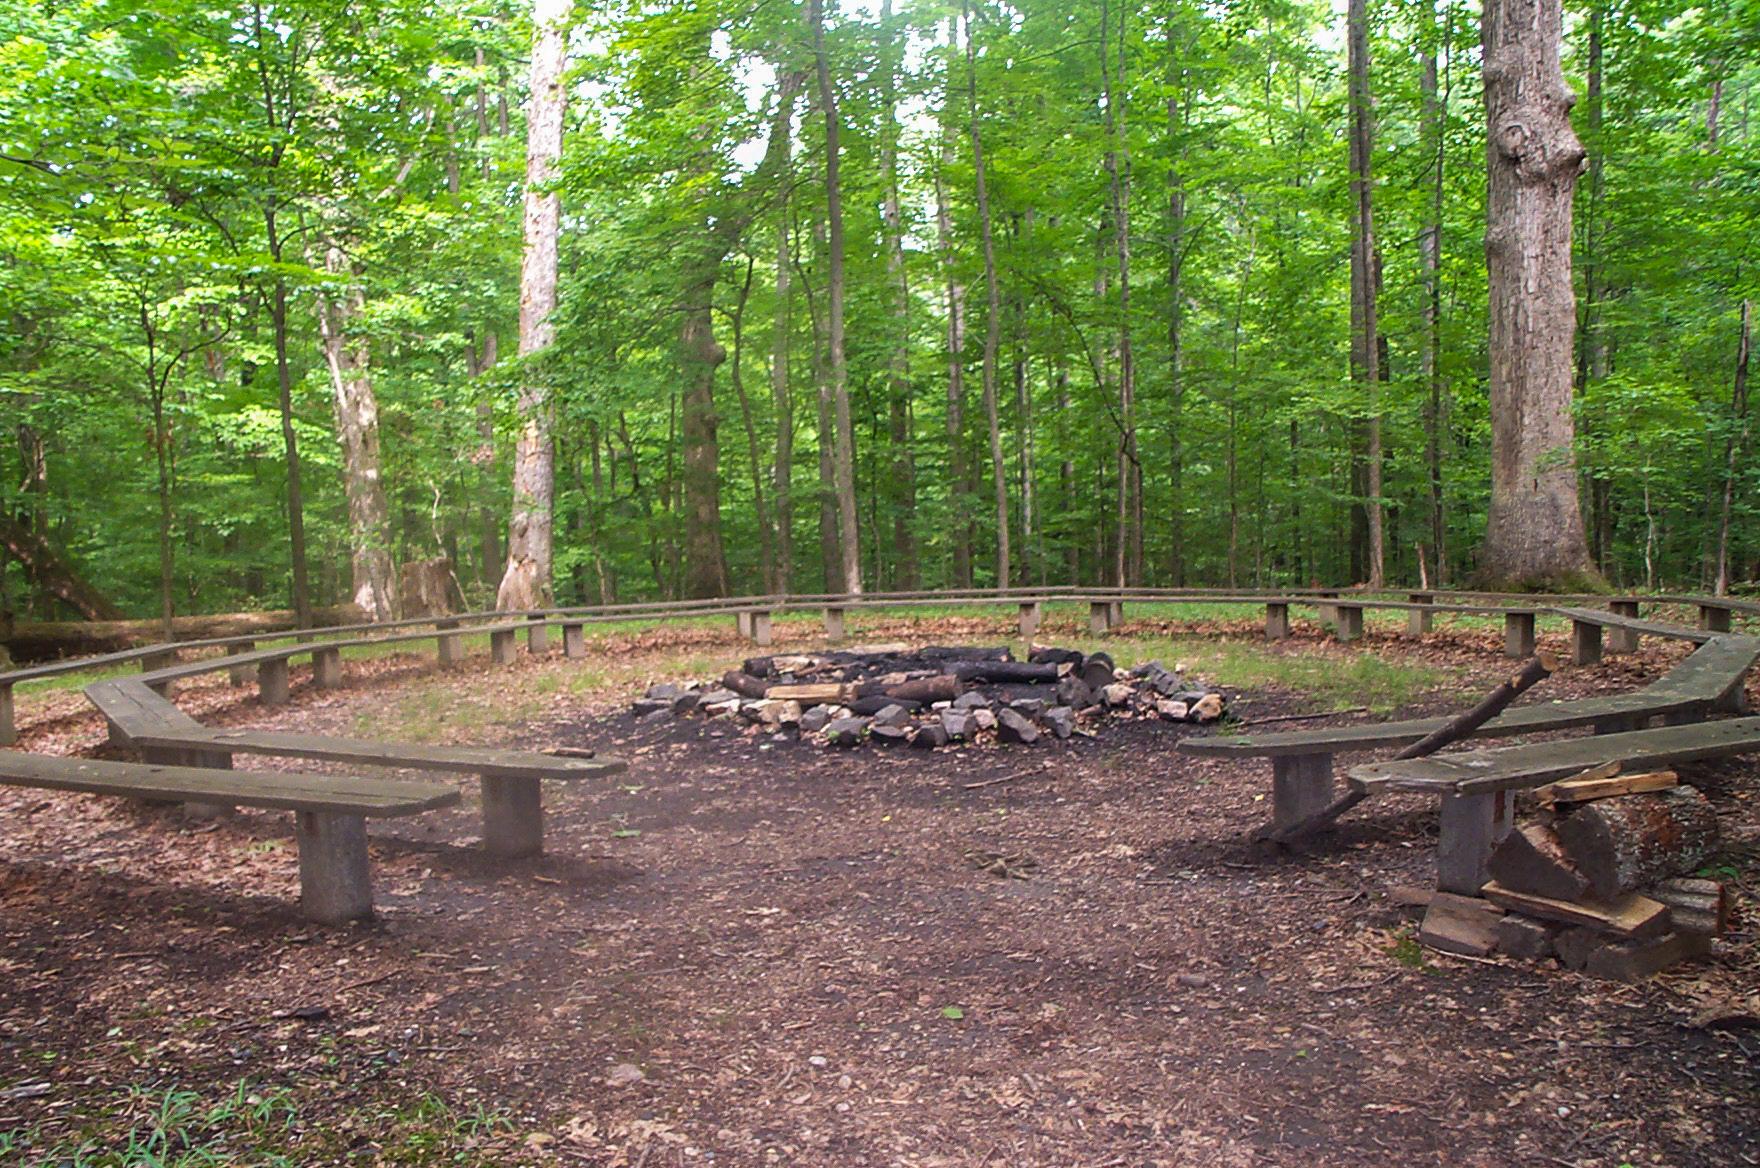 Wooden benches surround a large fire pit in a circle